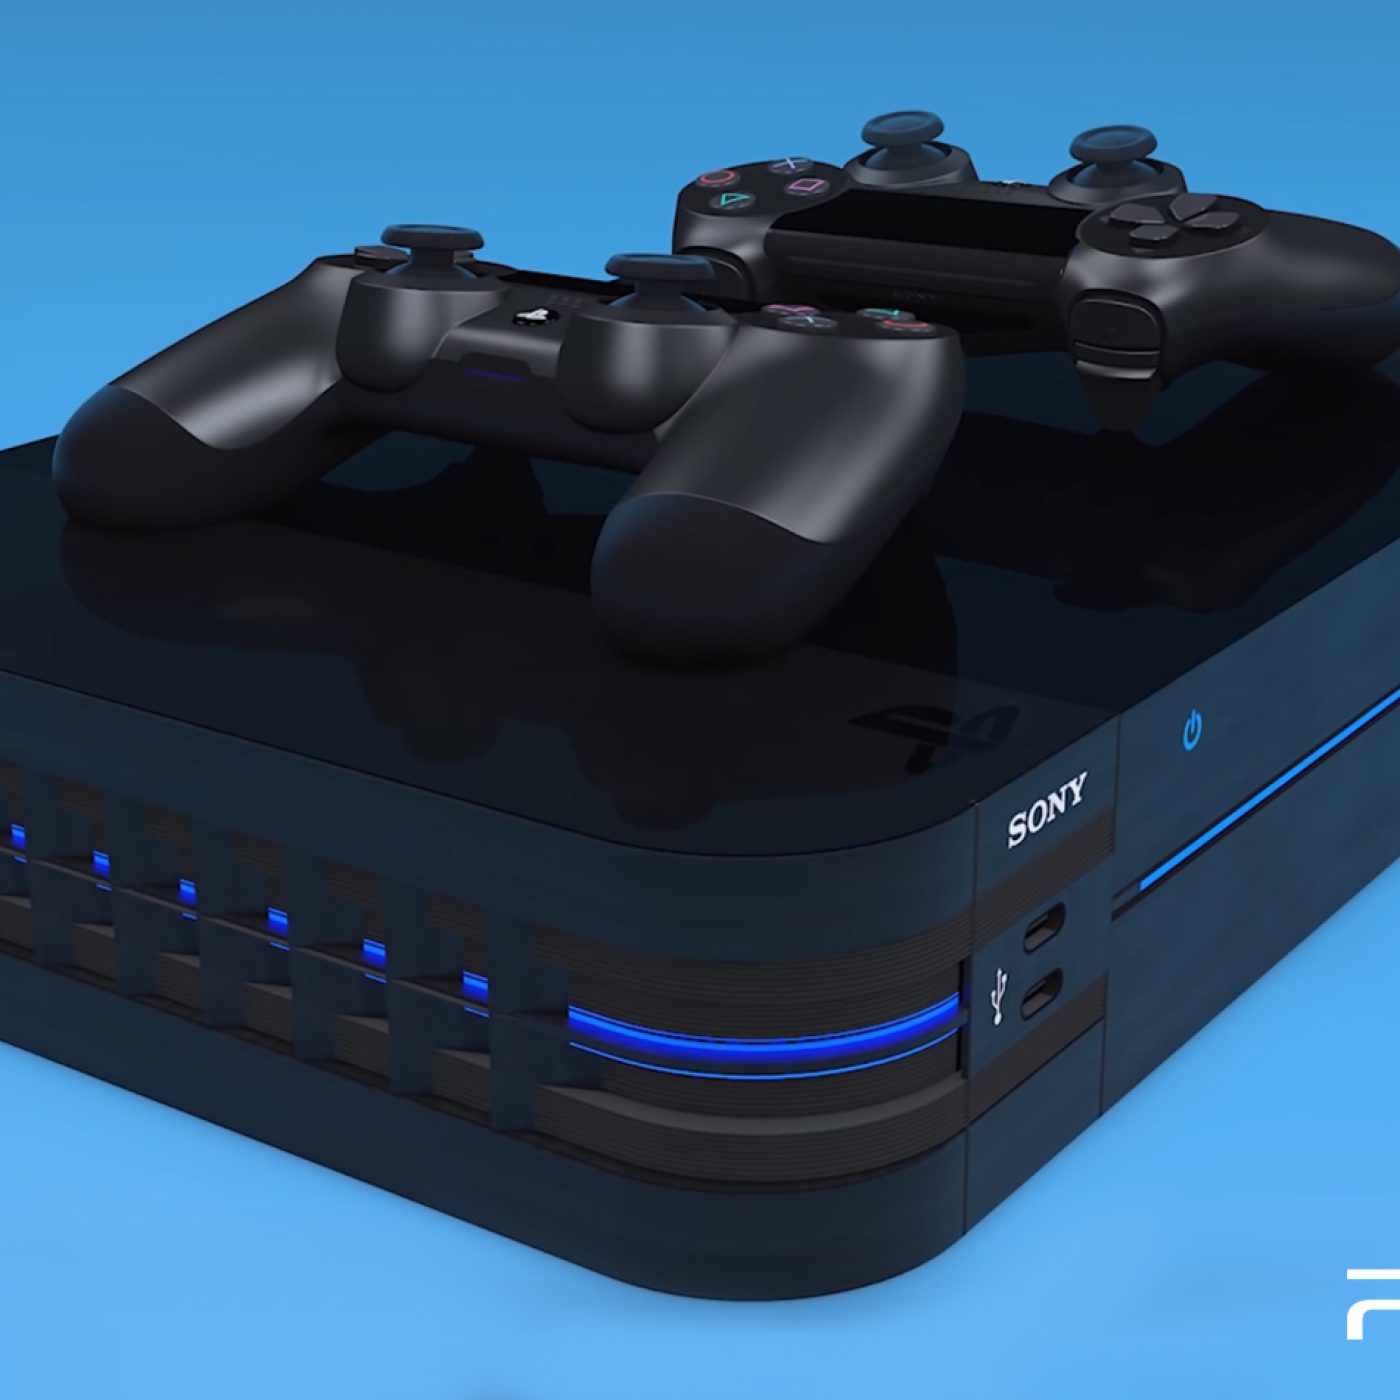 PS5 isn't even here, but there are already hints of a PS5 Pro